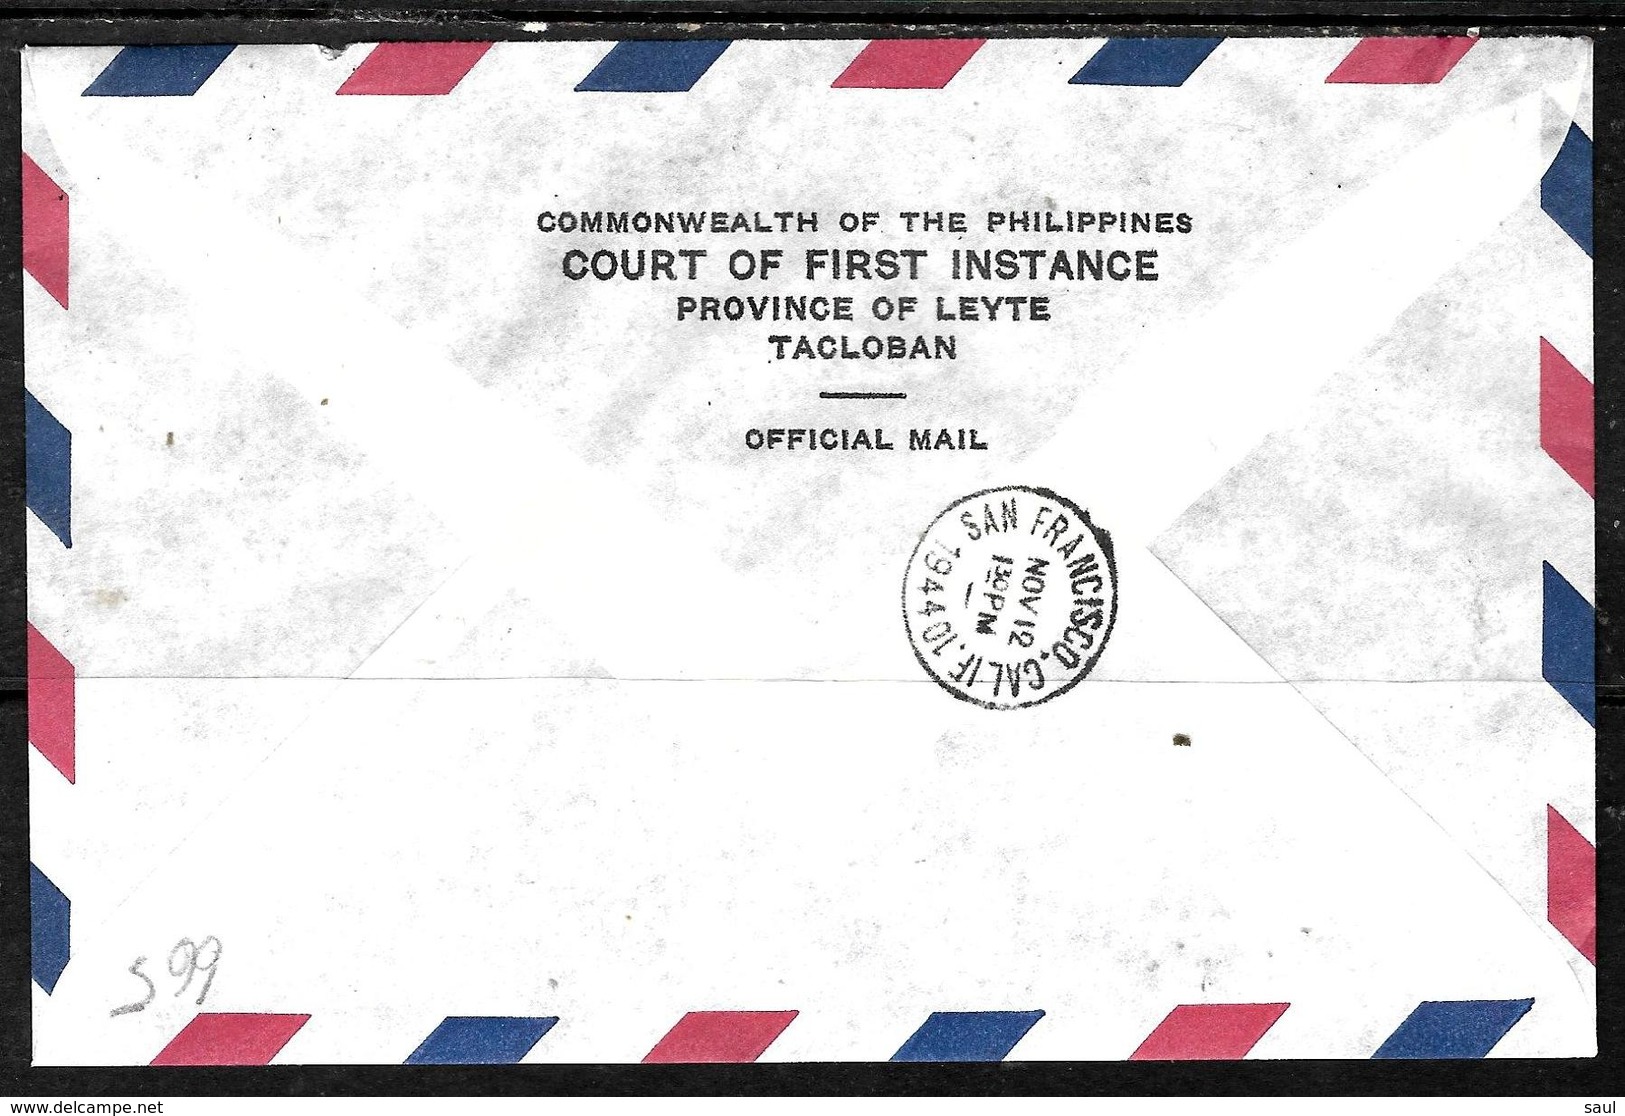 665 - USA - PHILIPPINES - WAR - 1944 - VICTORY OVPT - FD COVER - FORGERY, FALSE, FAKE, FAUX, FALSO, FALSC - Unclassified